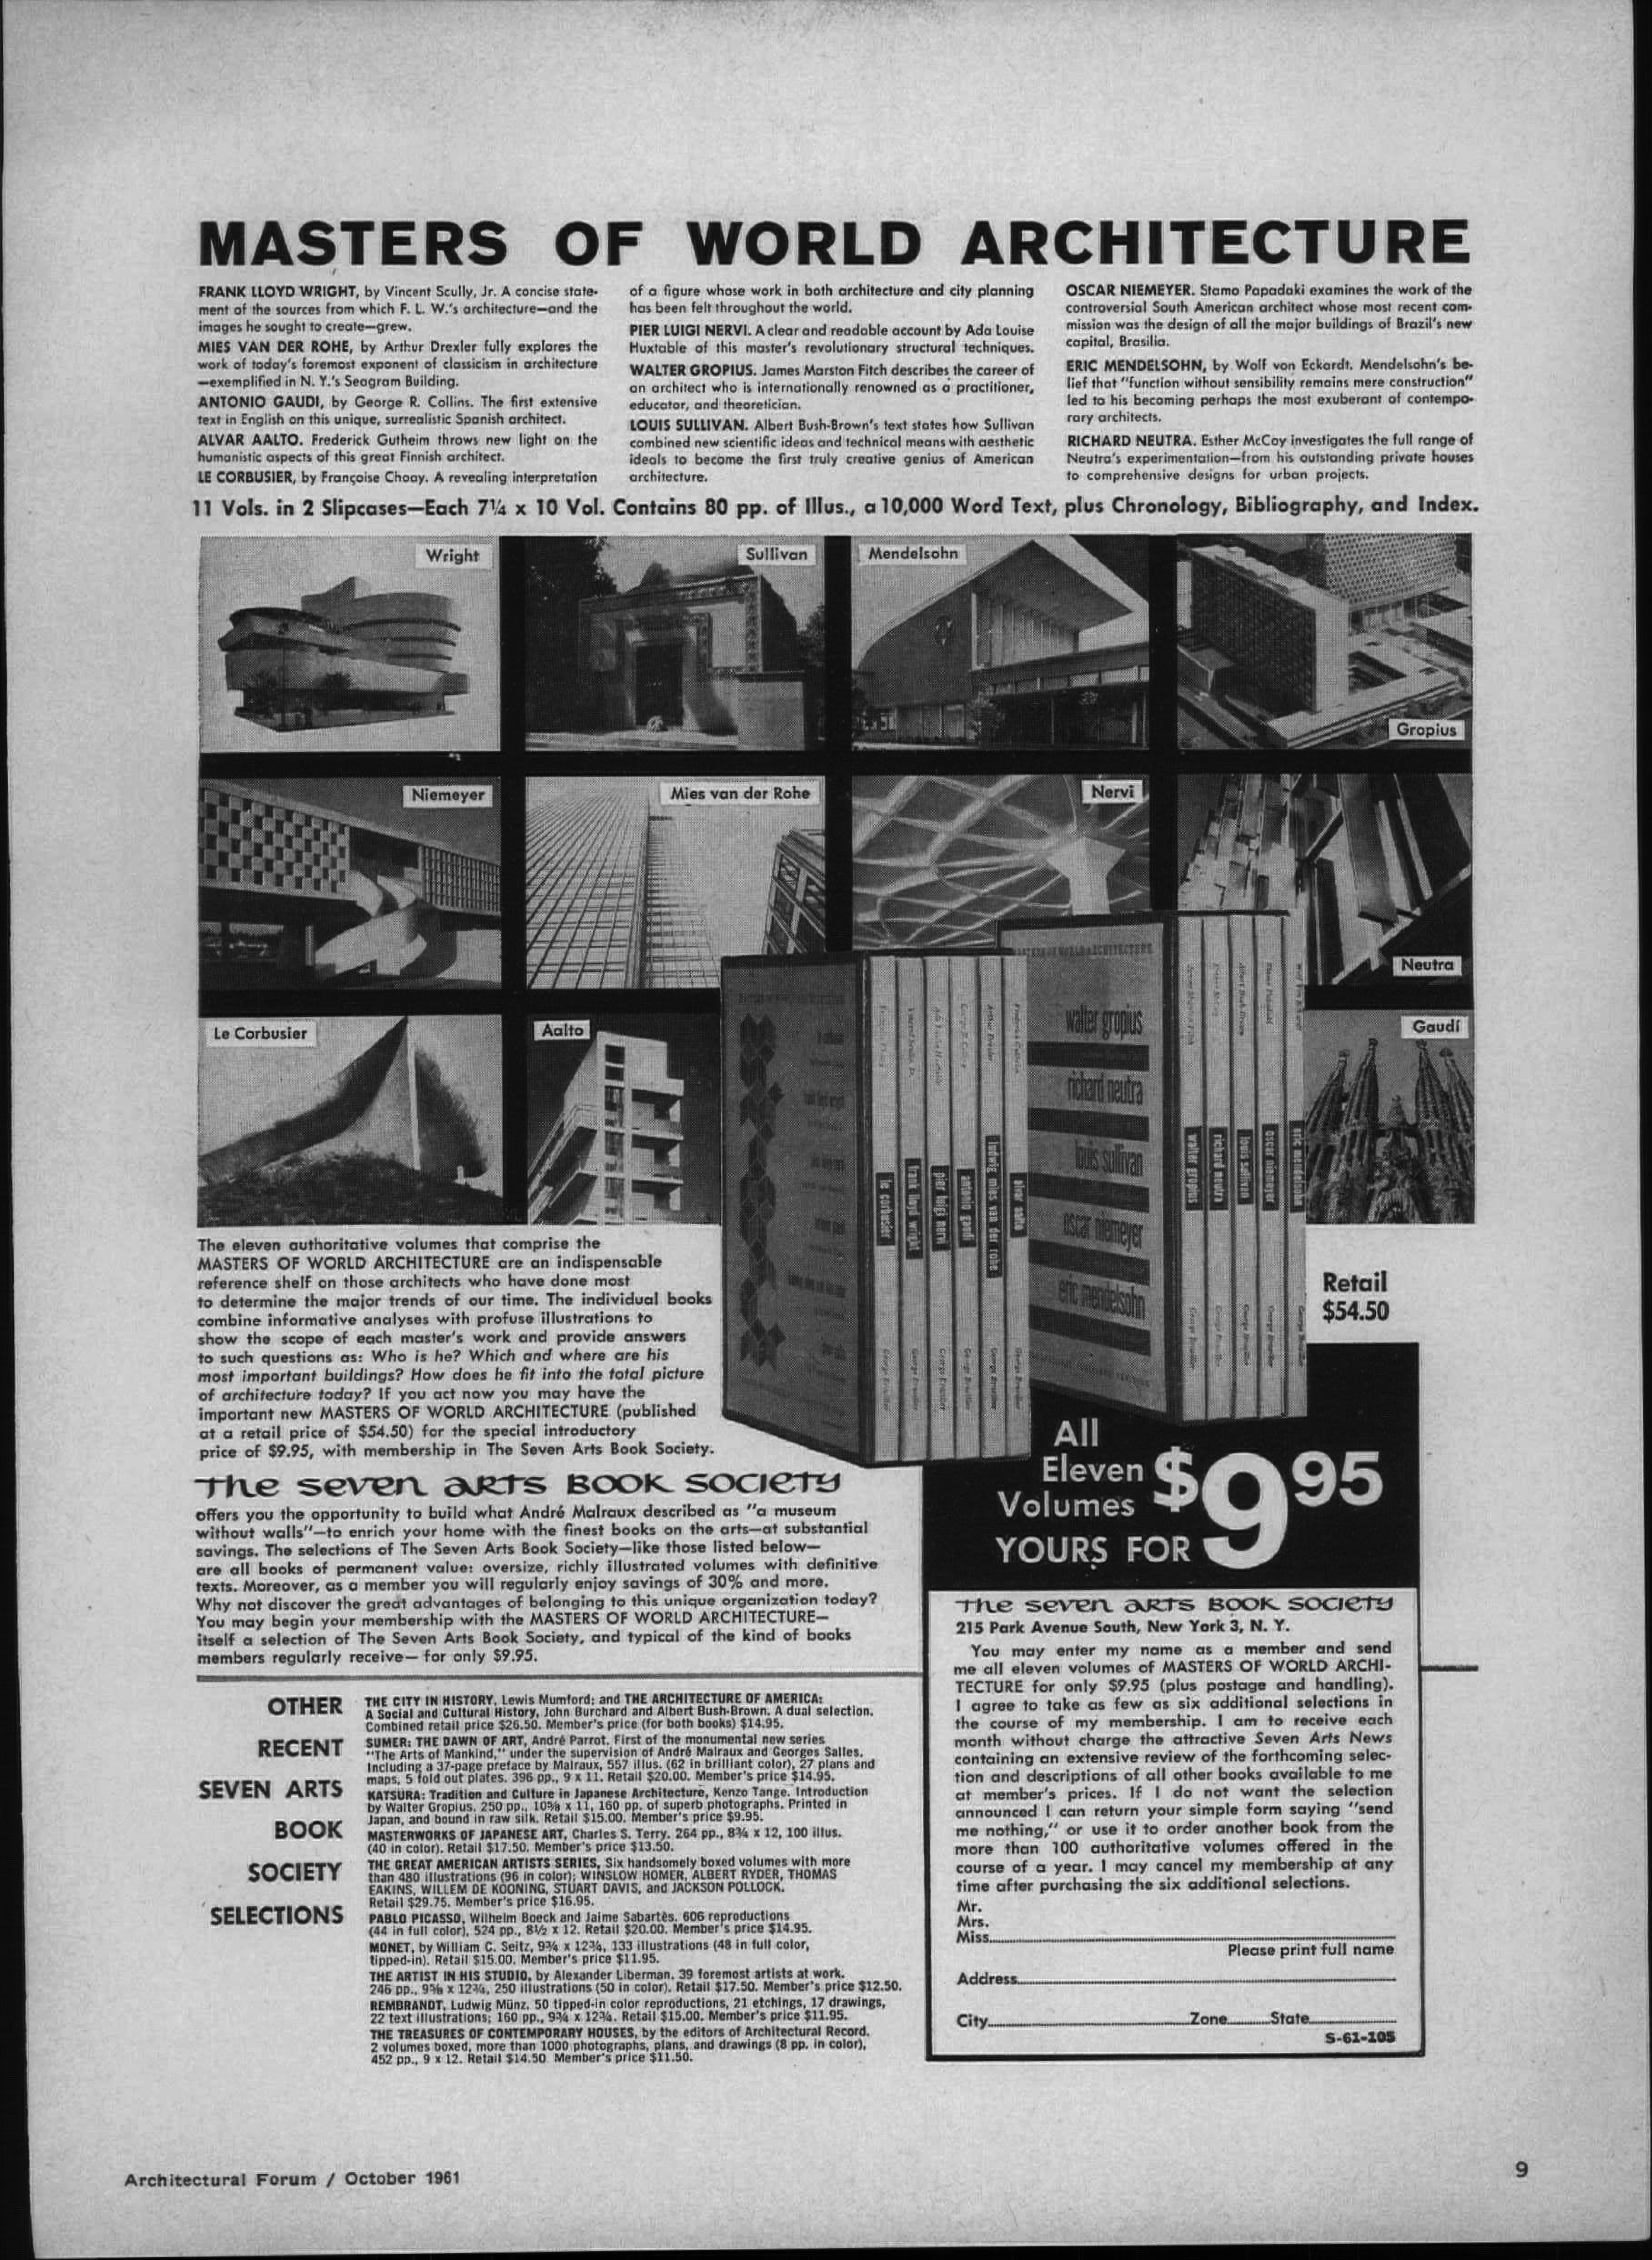 1961. “Masters of the World Architecture”, Architectural Forum, 115, no. 4 (October): 104-115.